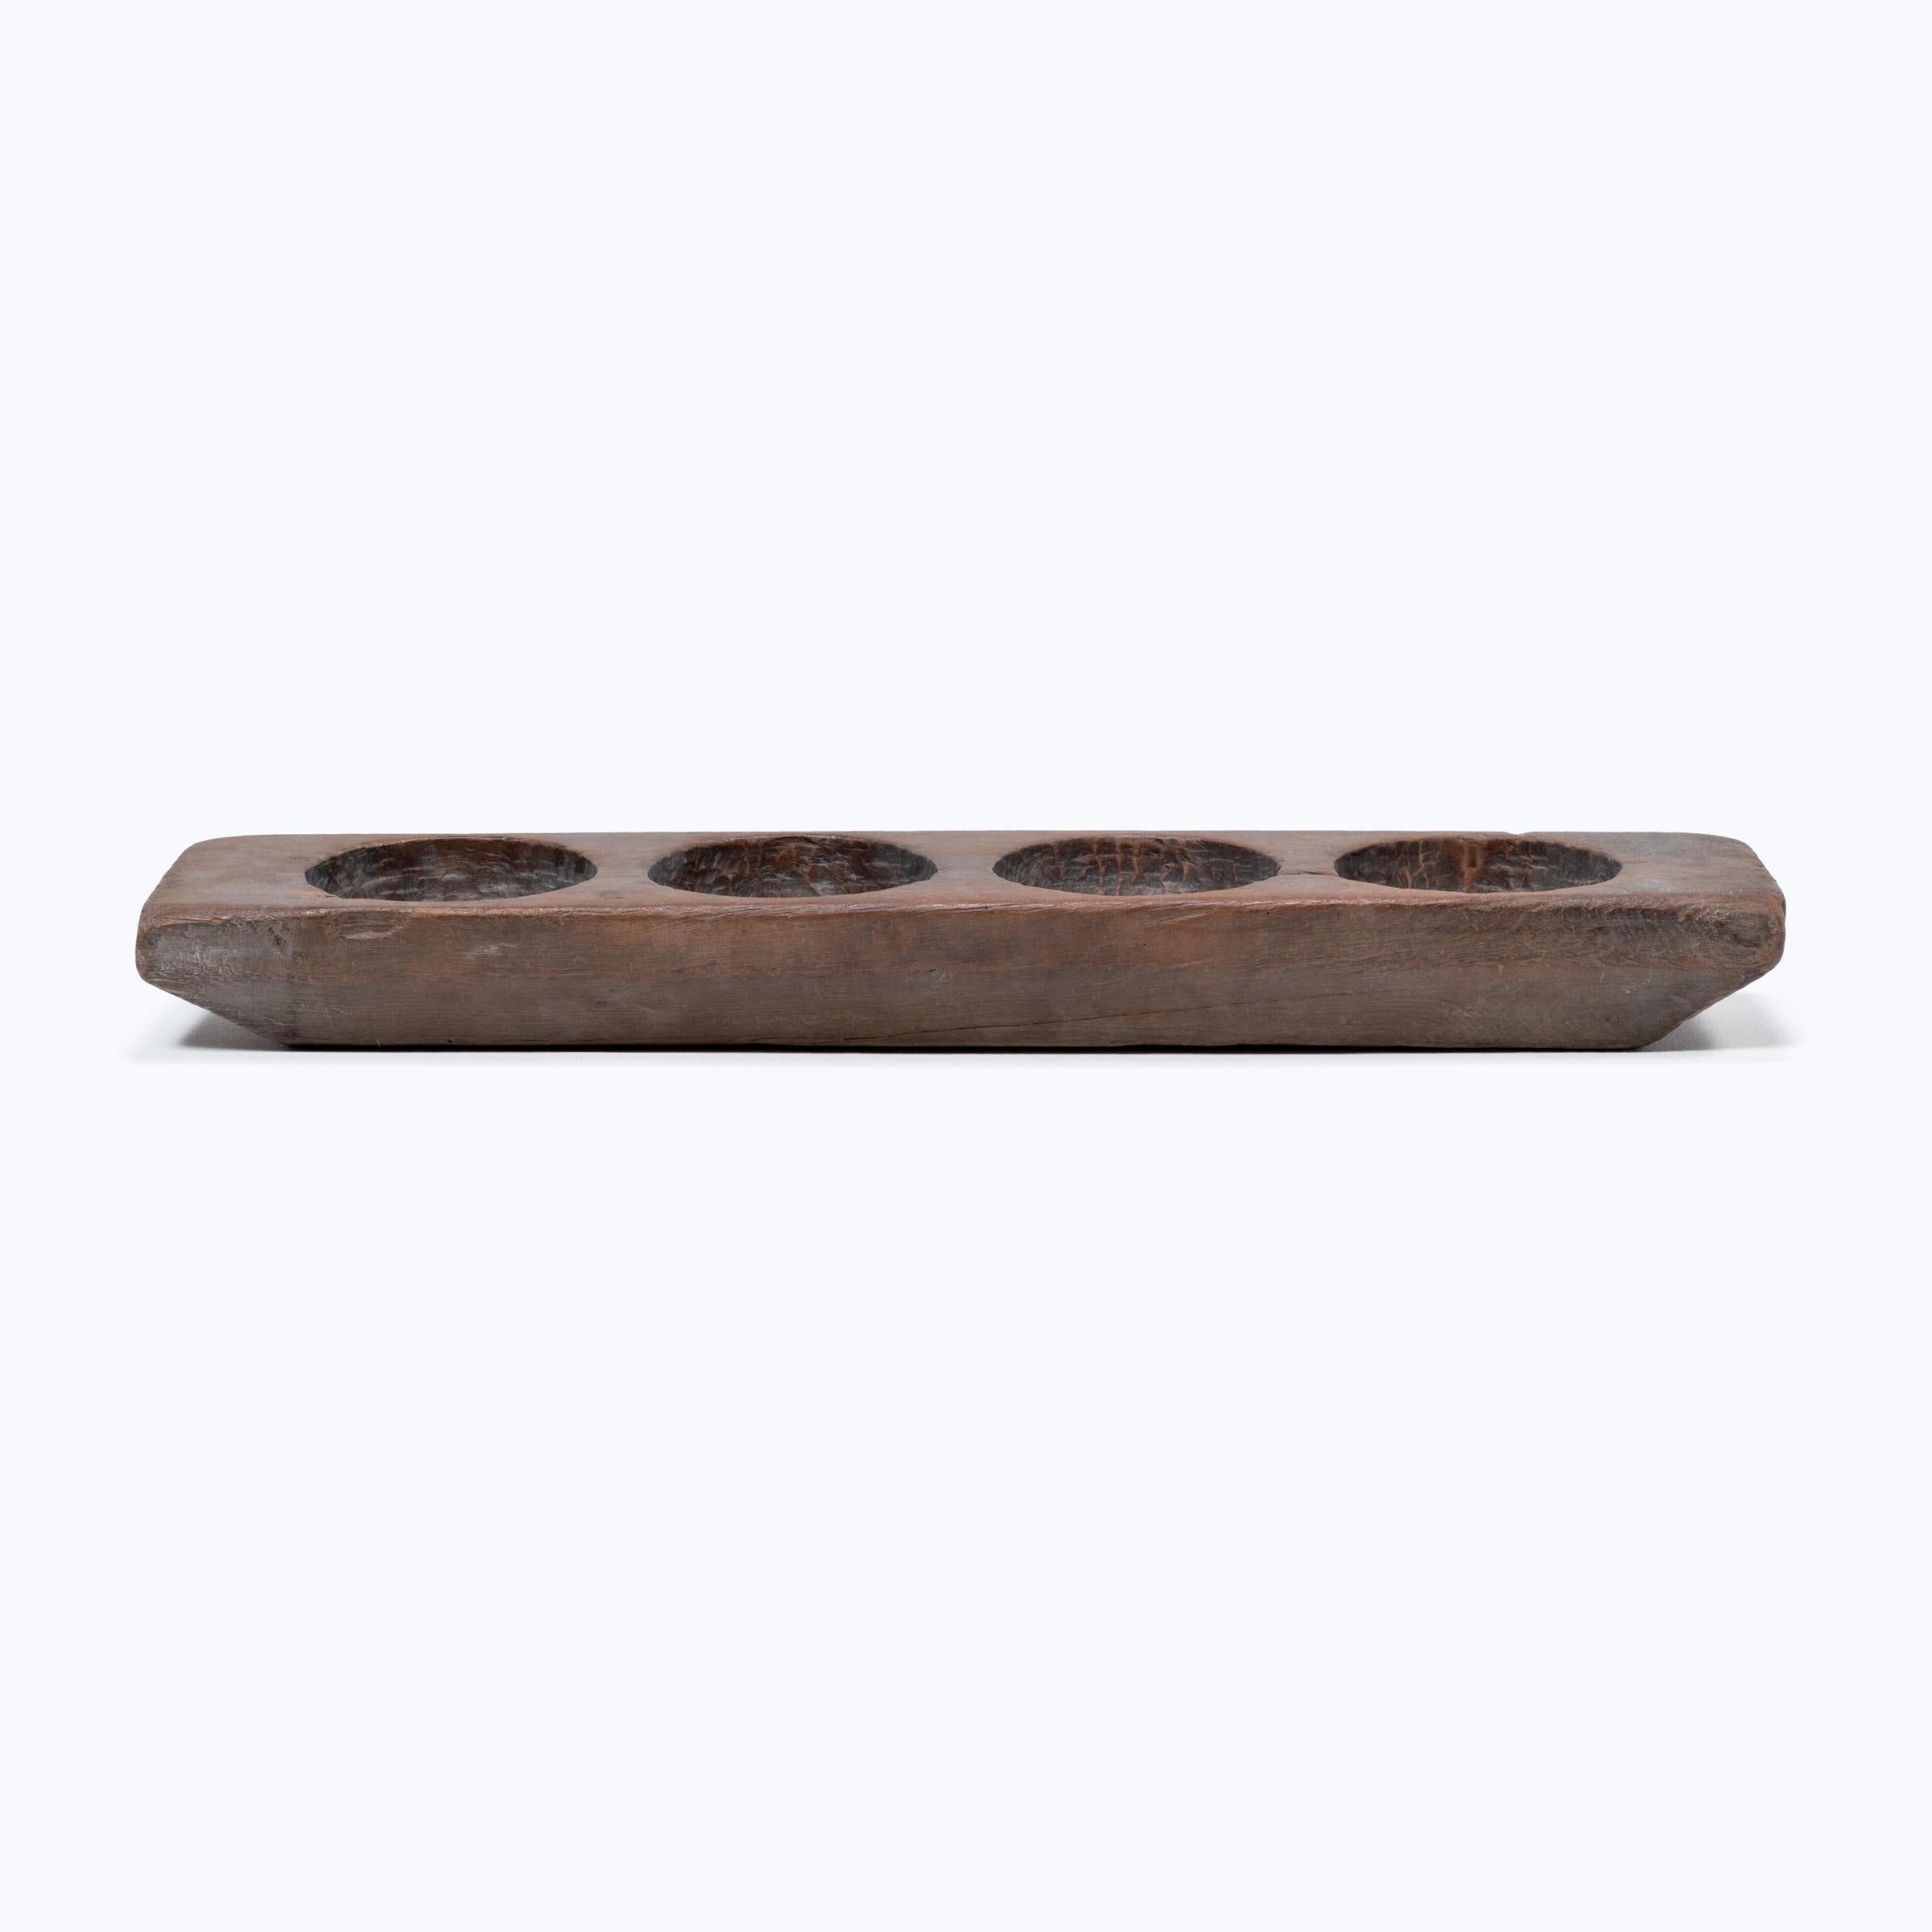 This unusual rectangular tray was originally used as a mortar for grinding and removing the husks of cereal grains. The multiple recesses provided a convenient way to prepare and store multiple grains and spices for a meal. The tray's trough-like